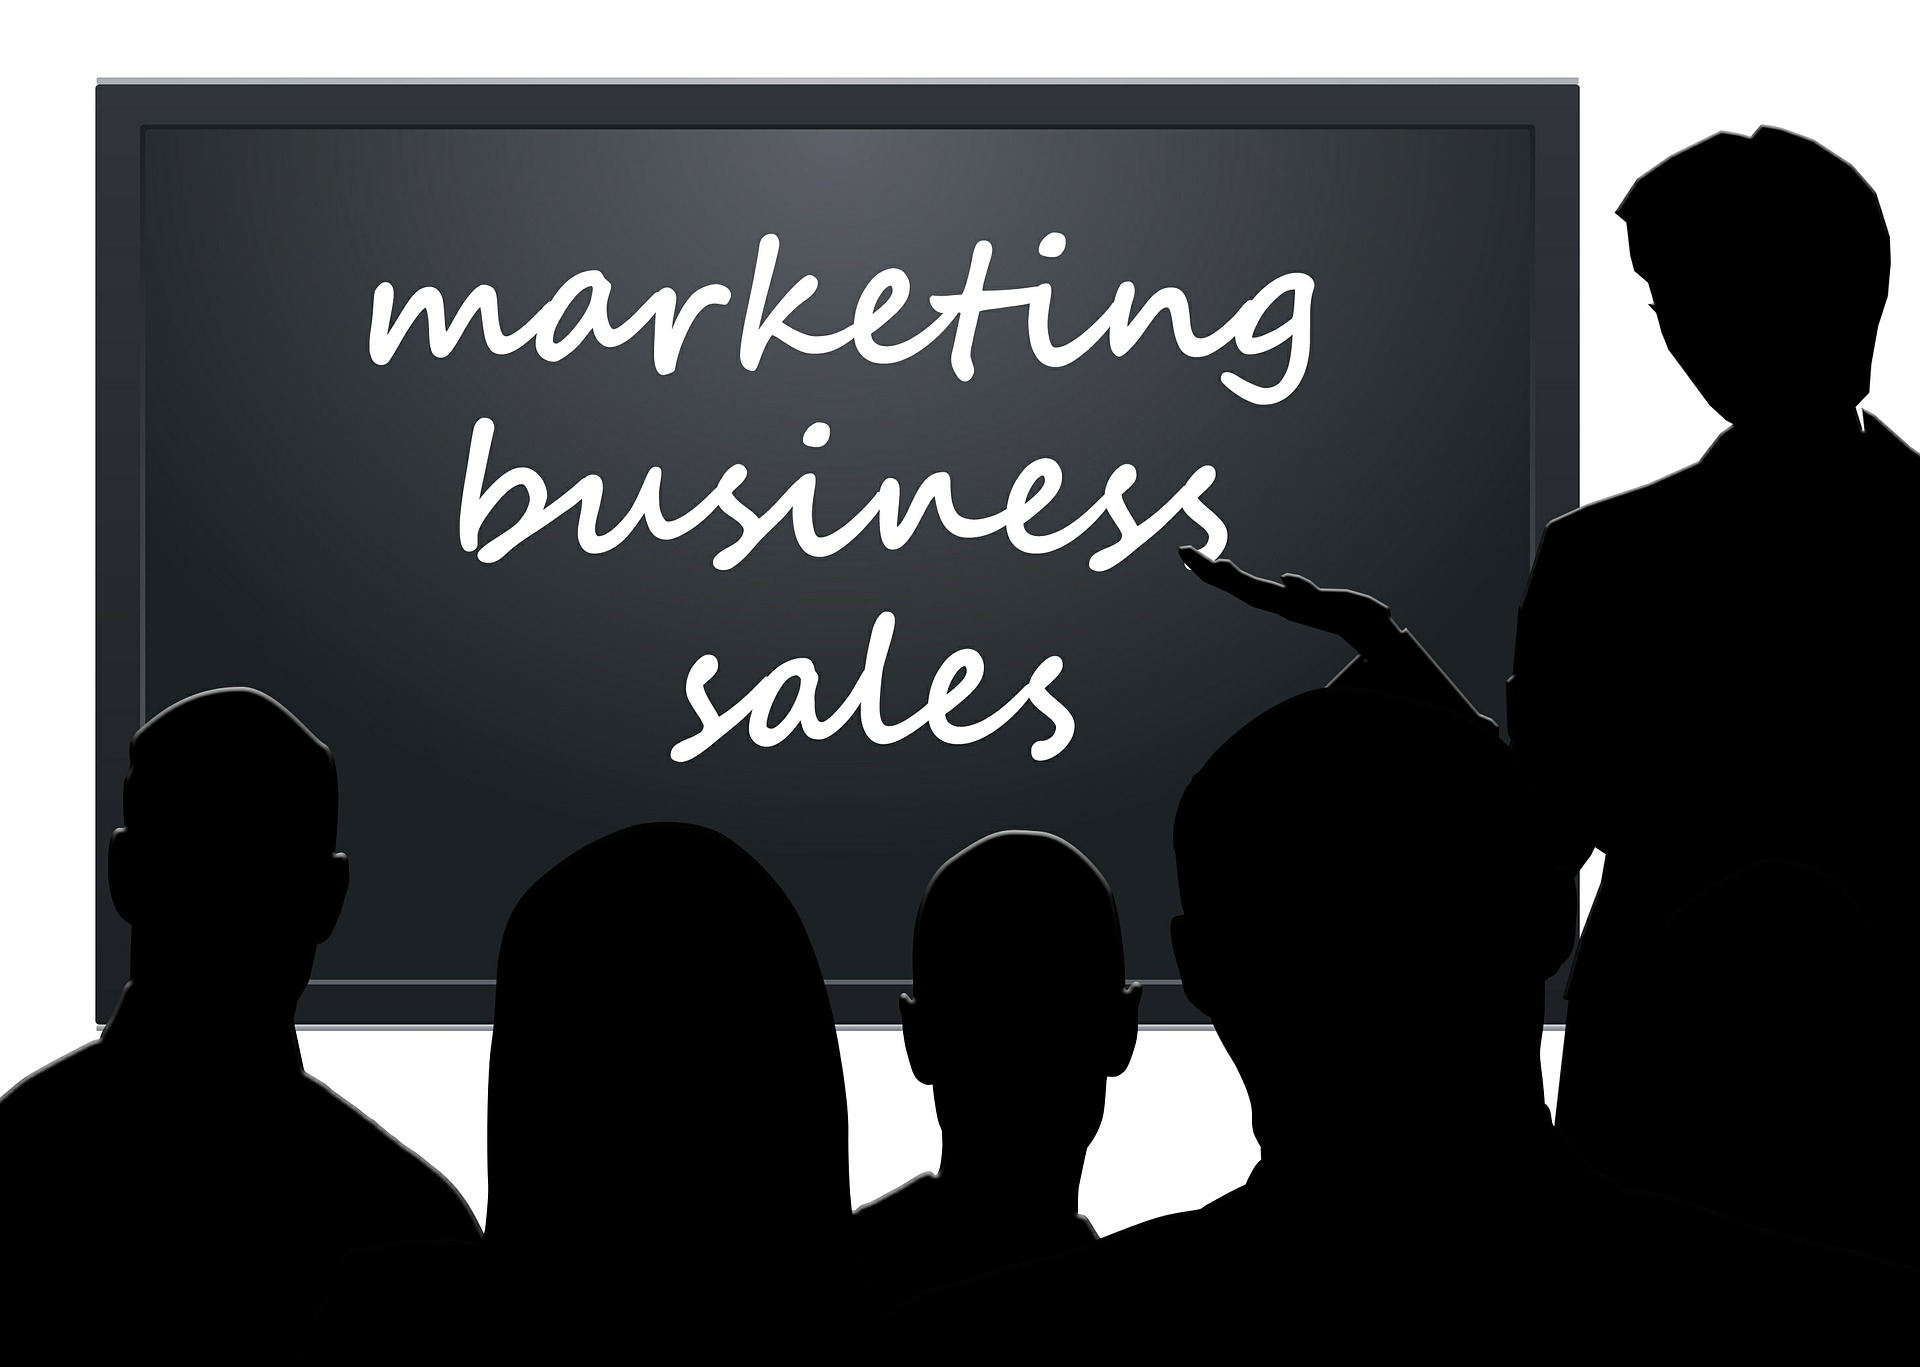 Want good Online Marketing Tips for your Business? Read this…